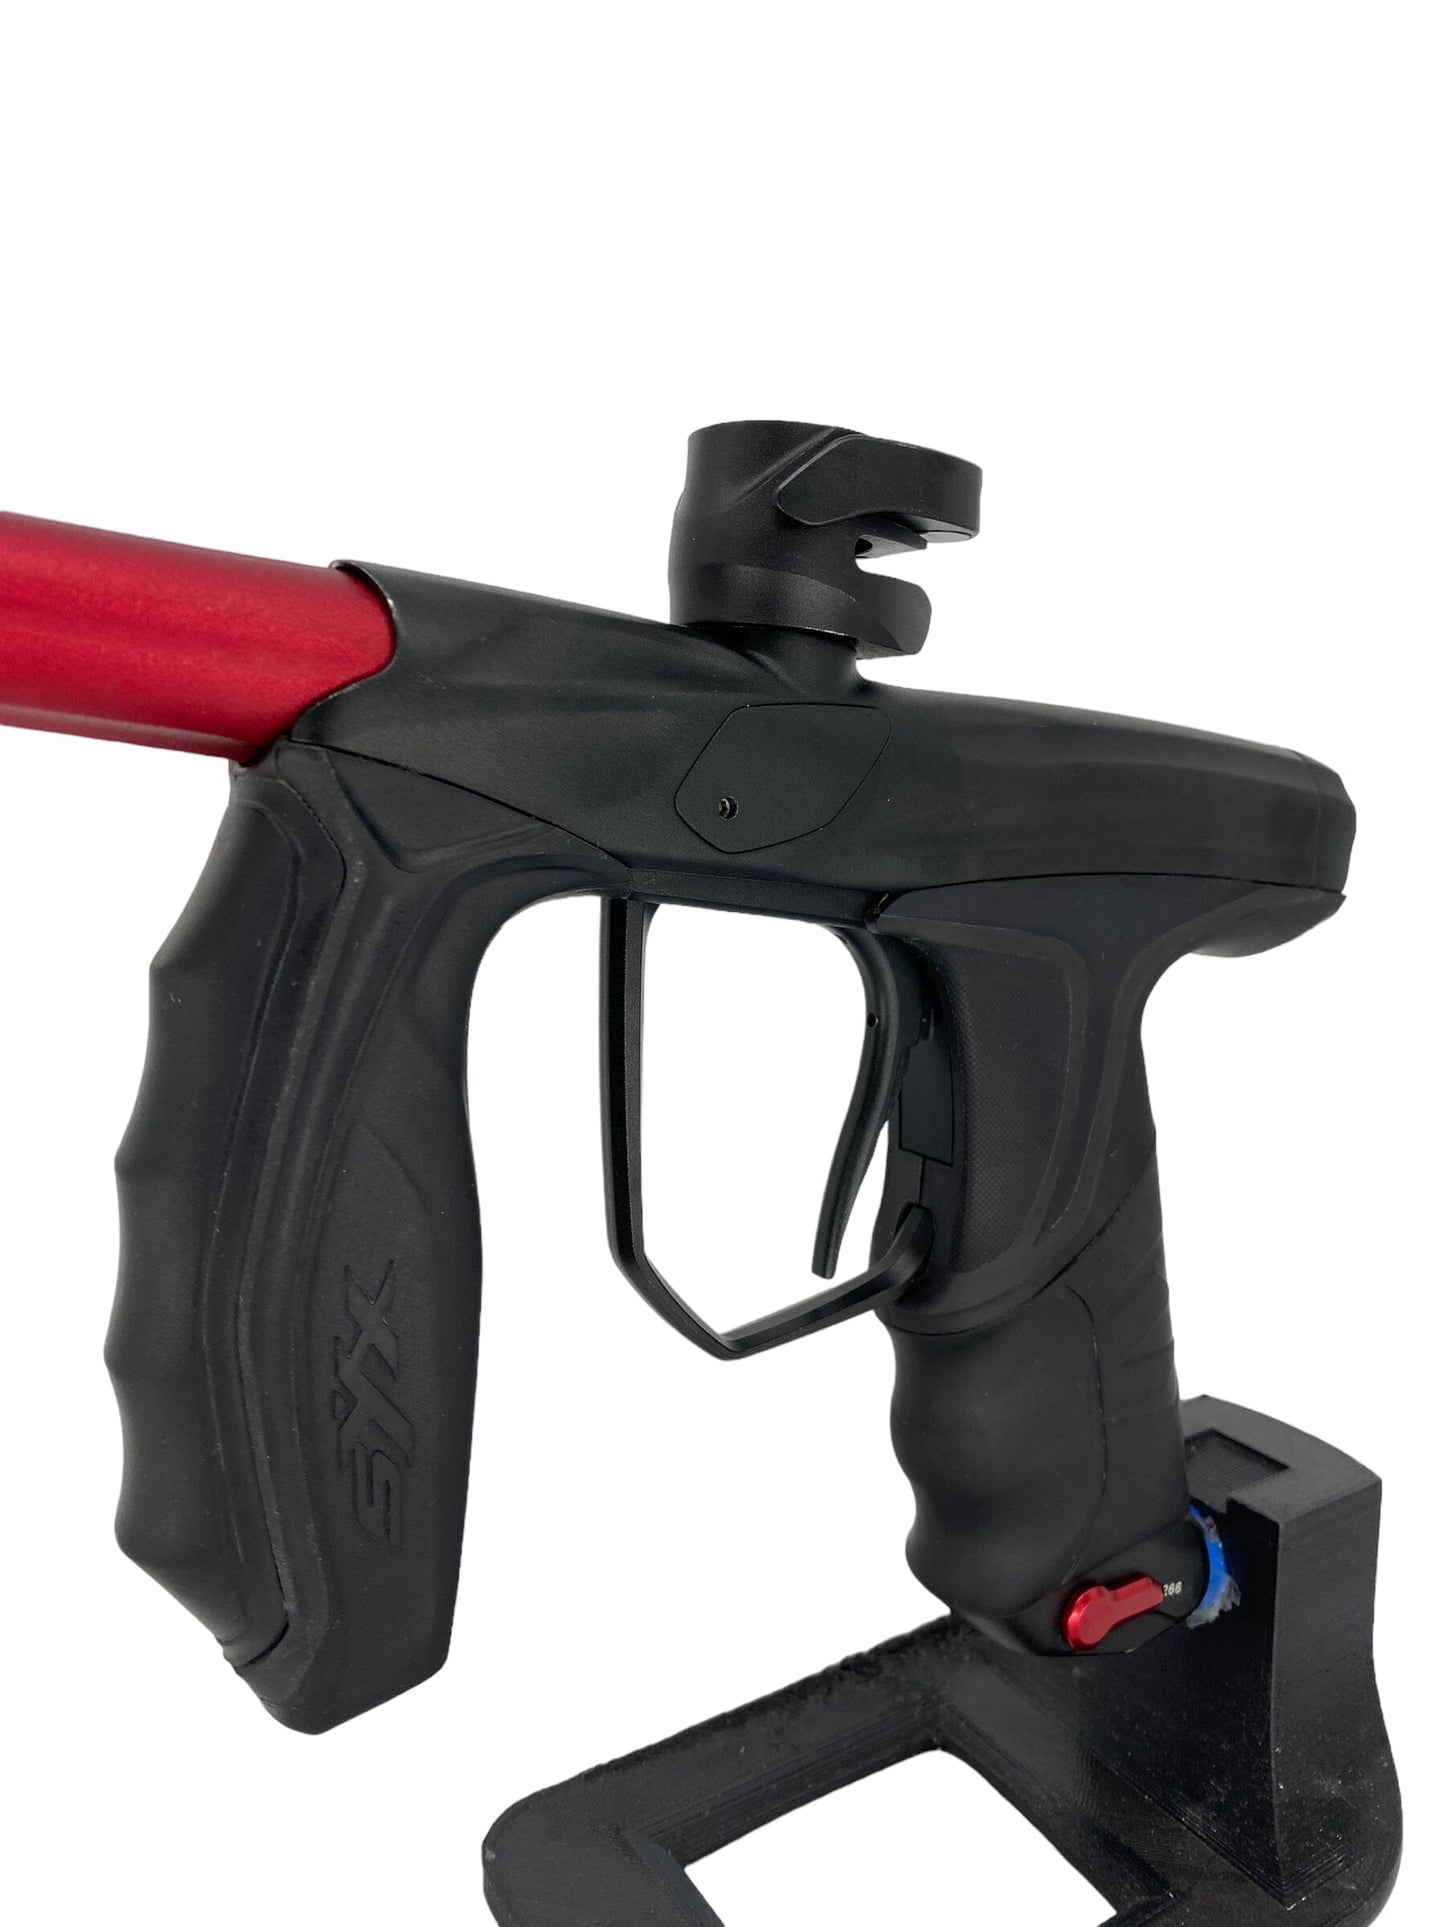 Used Empire Syx Paintball Gun Paintball Gun from CPXBrosPaintball Buy/Sell/Trade Paintball Markers, Paintball Hoppers, Paintball Masks, and Hormesis Headbands